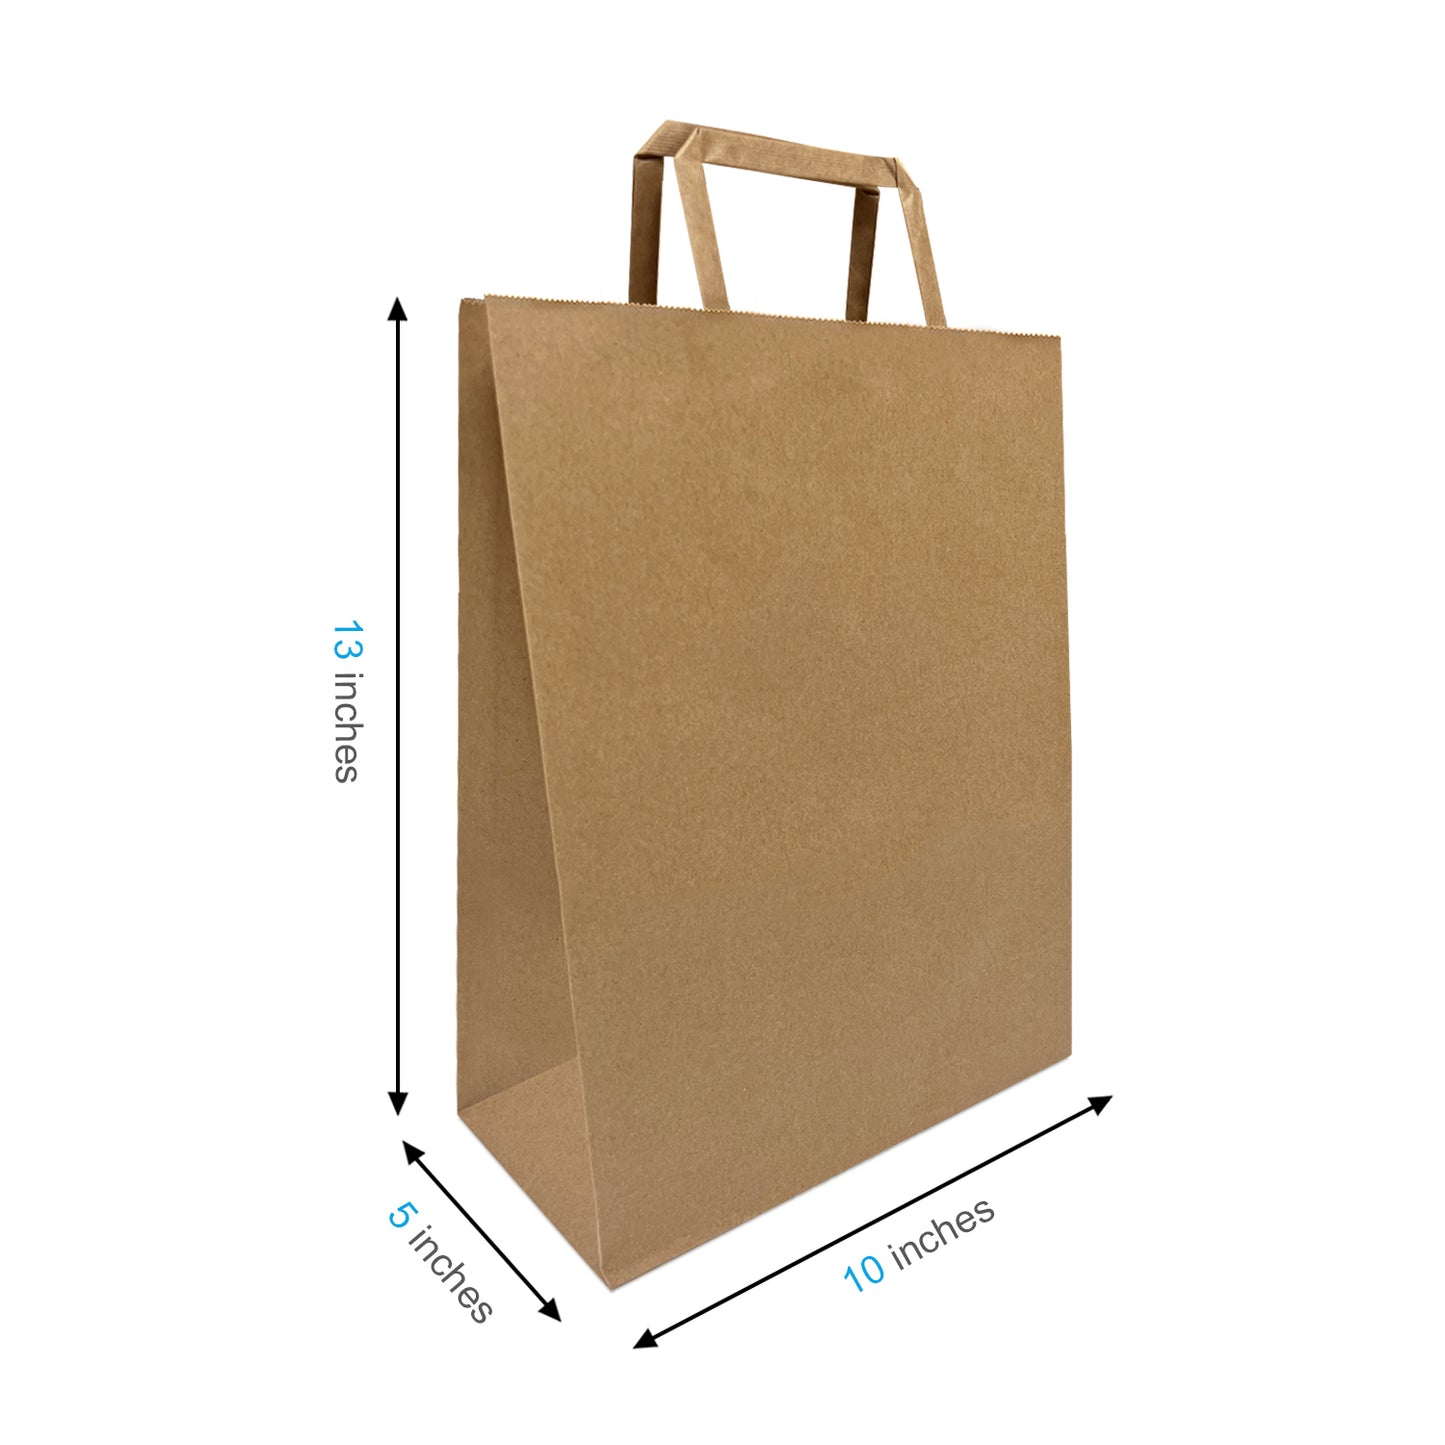 300 Pcs, Debbie, 10x5x13 inches, Kraft Paper Bags, with Flat Handle